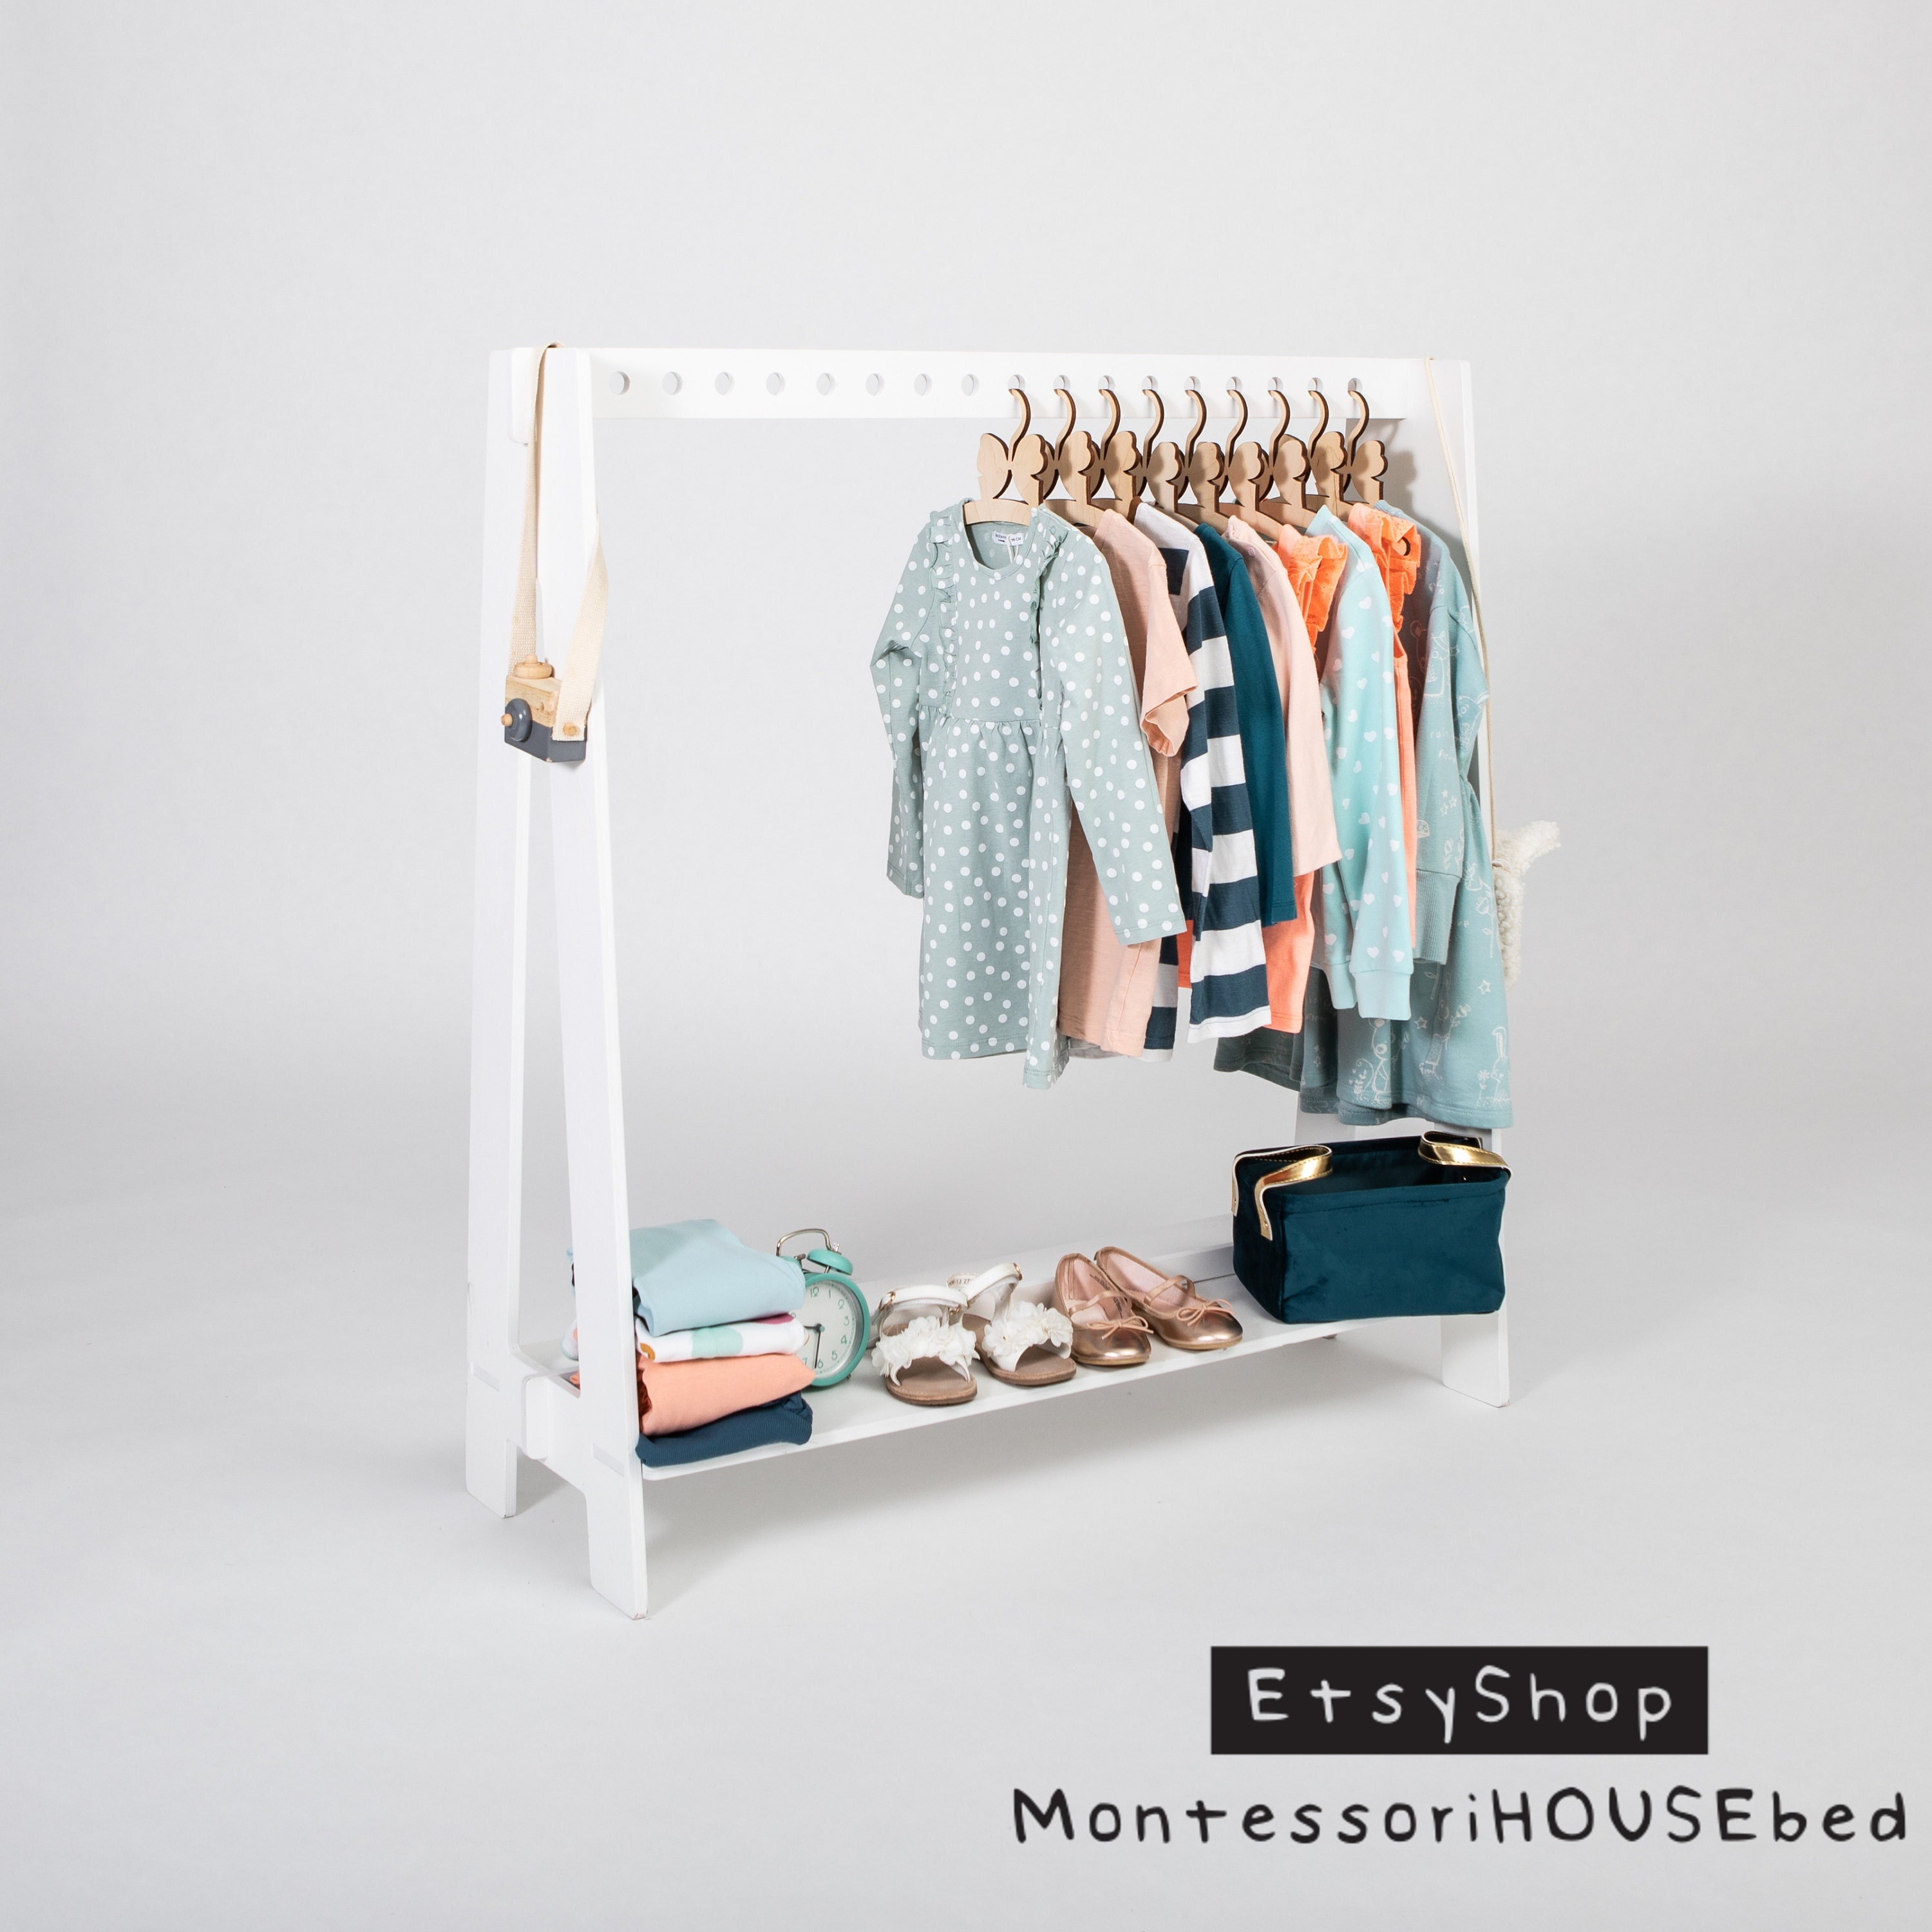 KIDS CLOTHING RACK Type A With Shelf, Wood Clothes Rack, Montessori Clothe  Hanging Rack and Shelf, Kids Wardrobe Christmas Gift for Kids 